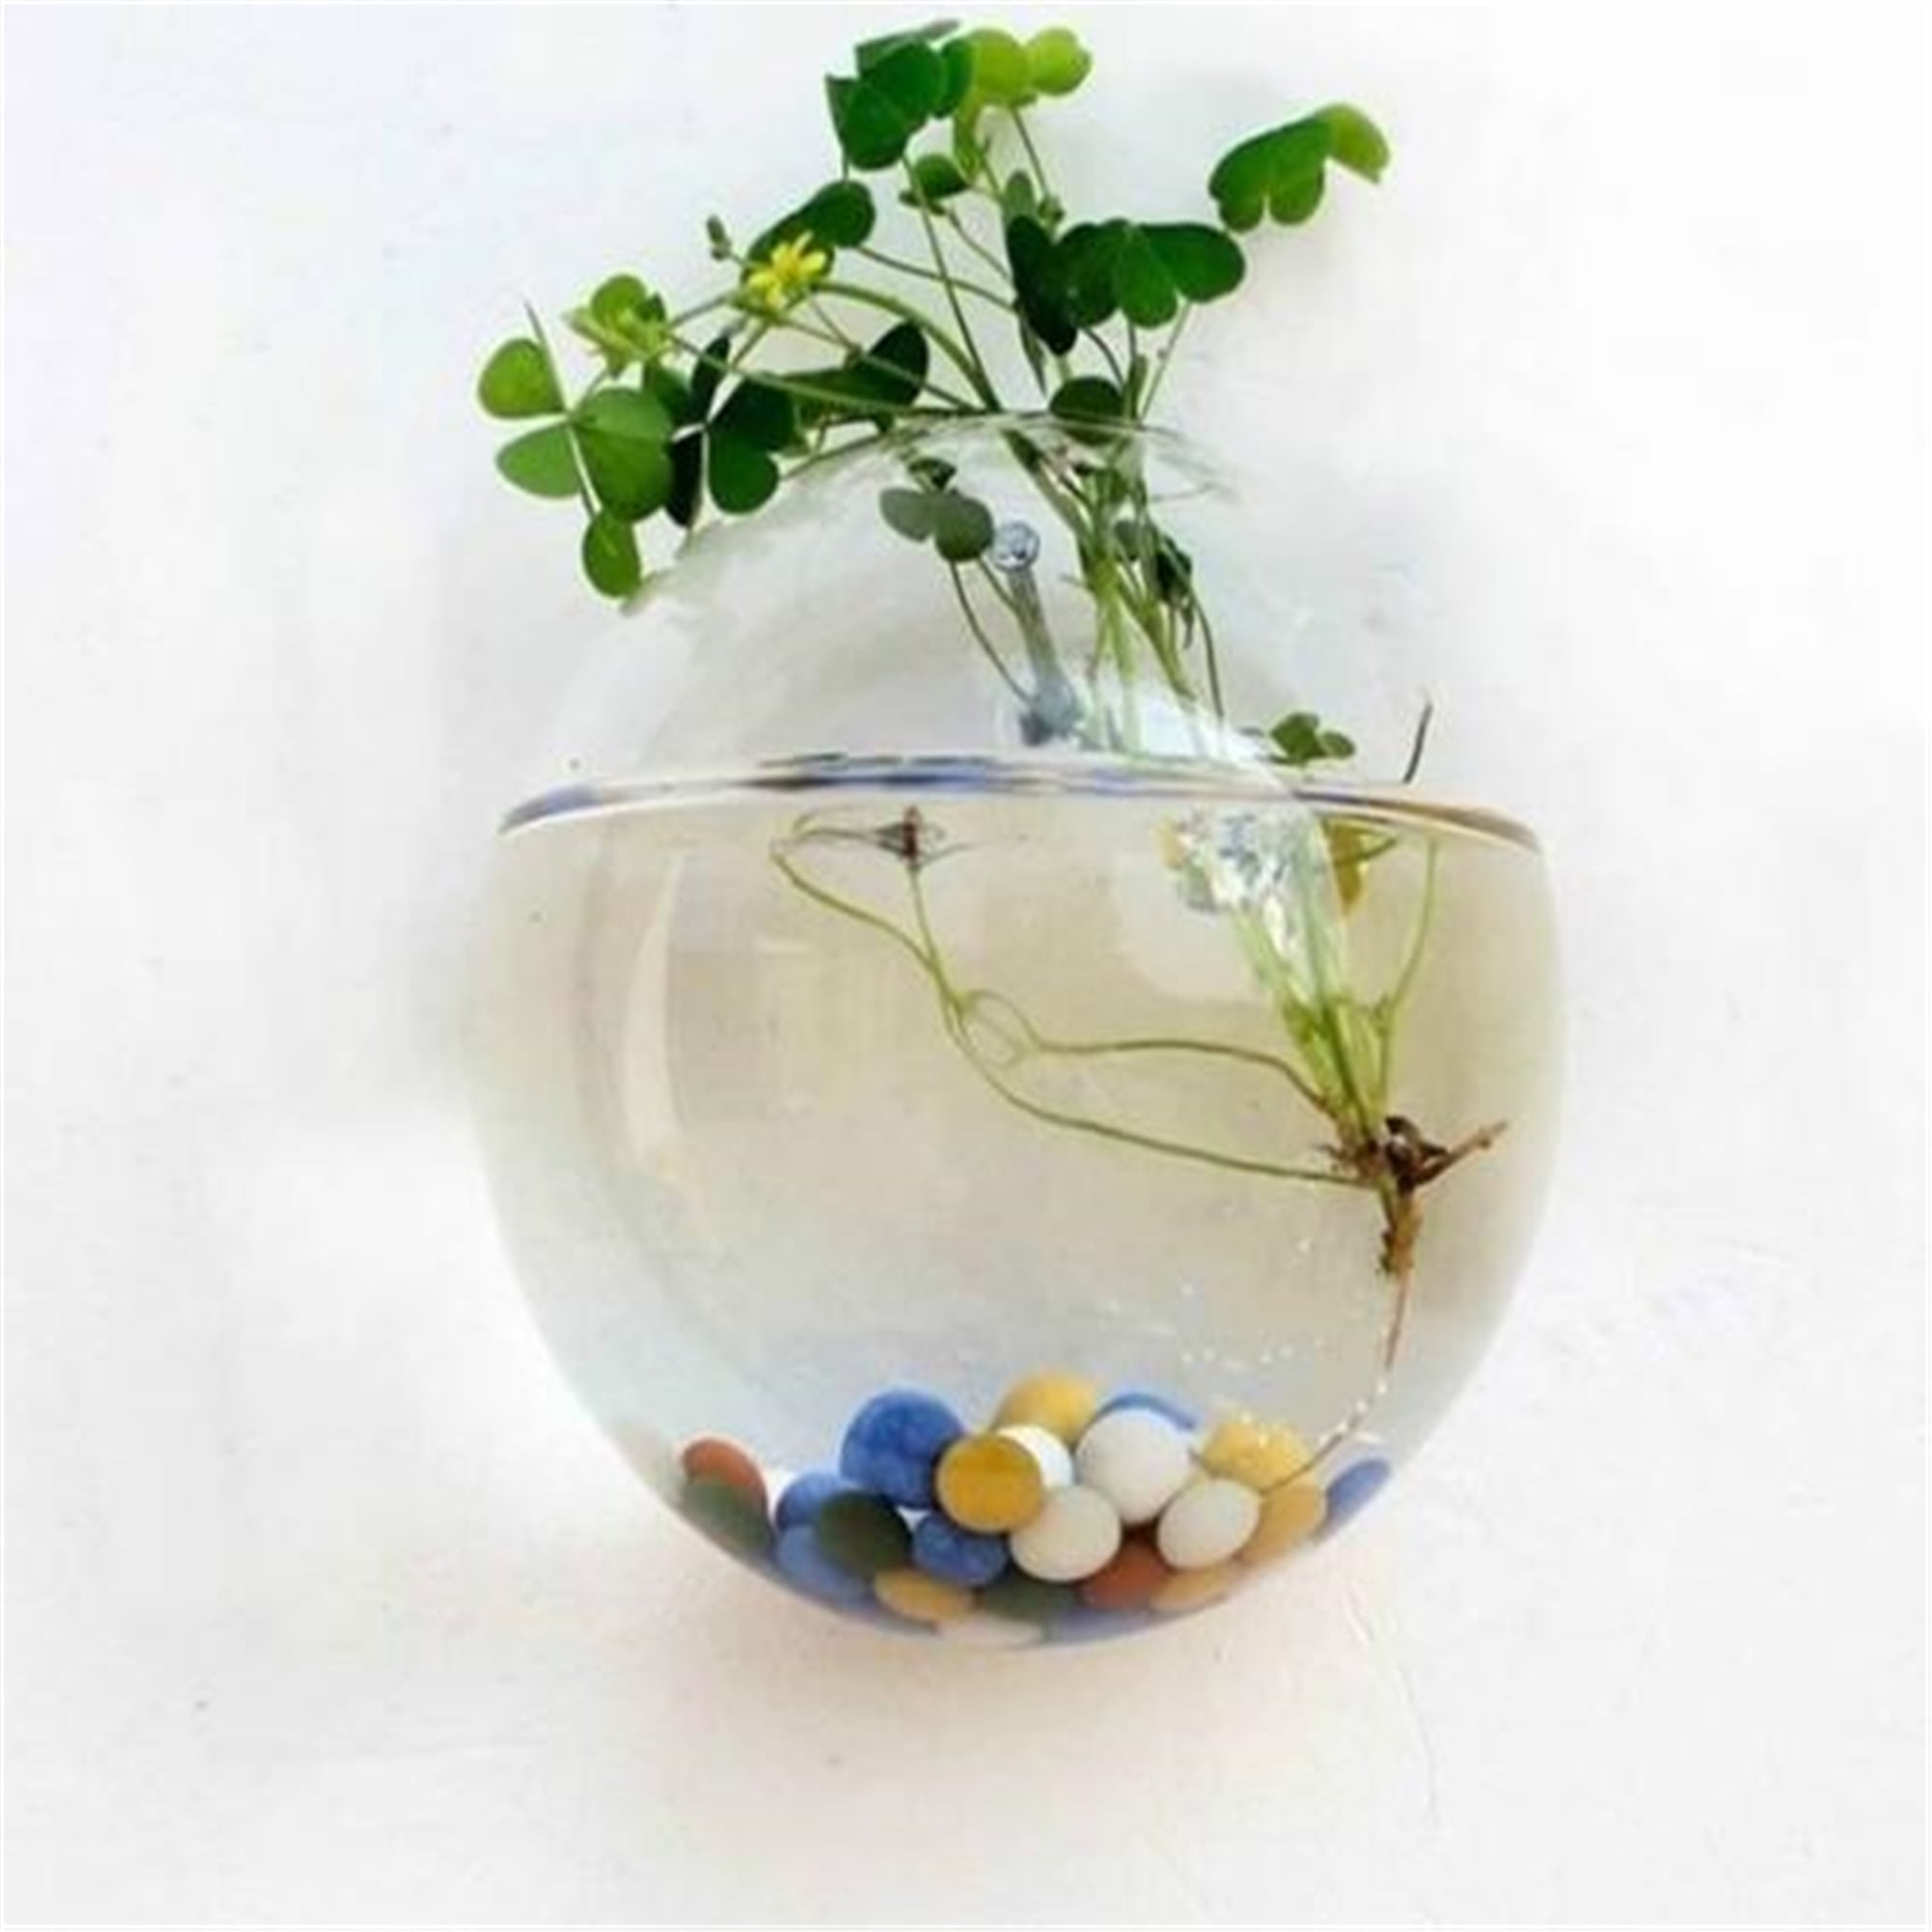 Details about   Wall Hanging Terrariums Indoor Plants Holders Wall Glass Vase Wall Planters 3Pcs 